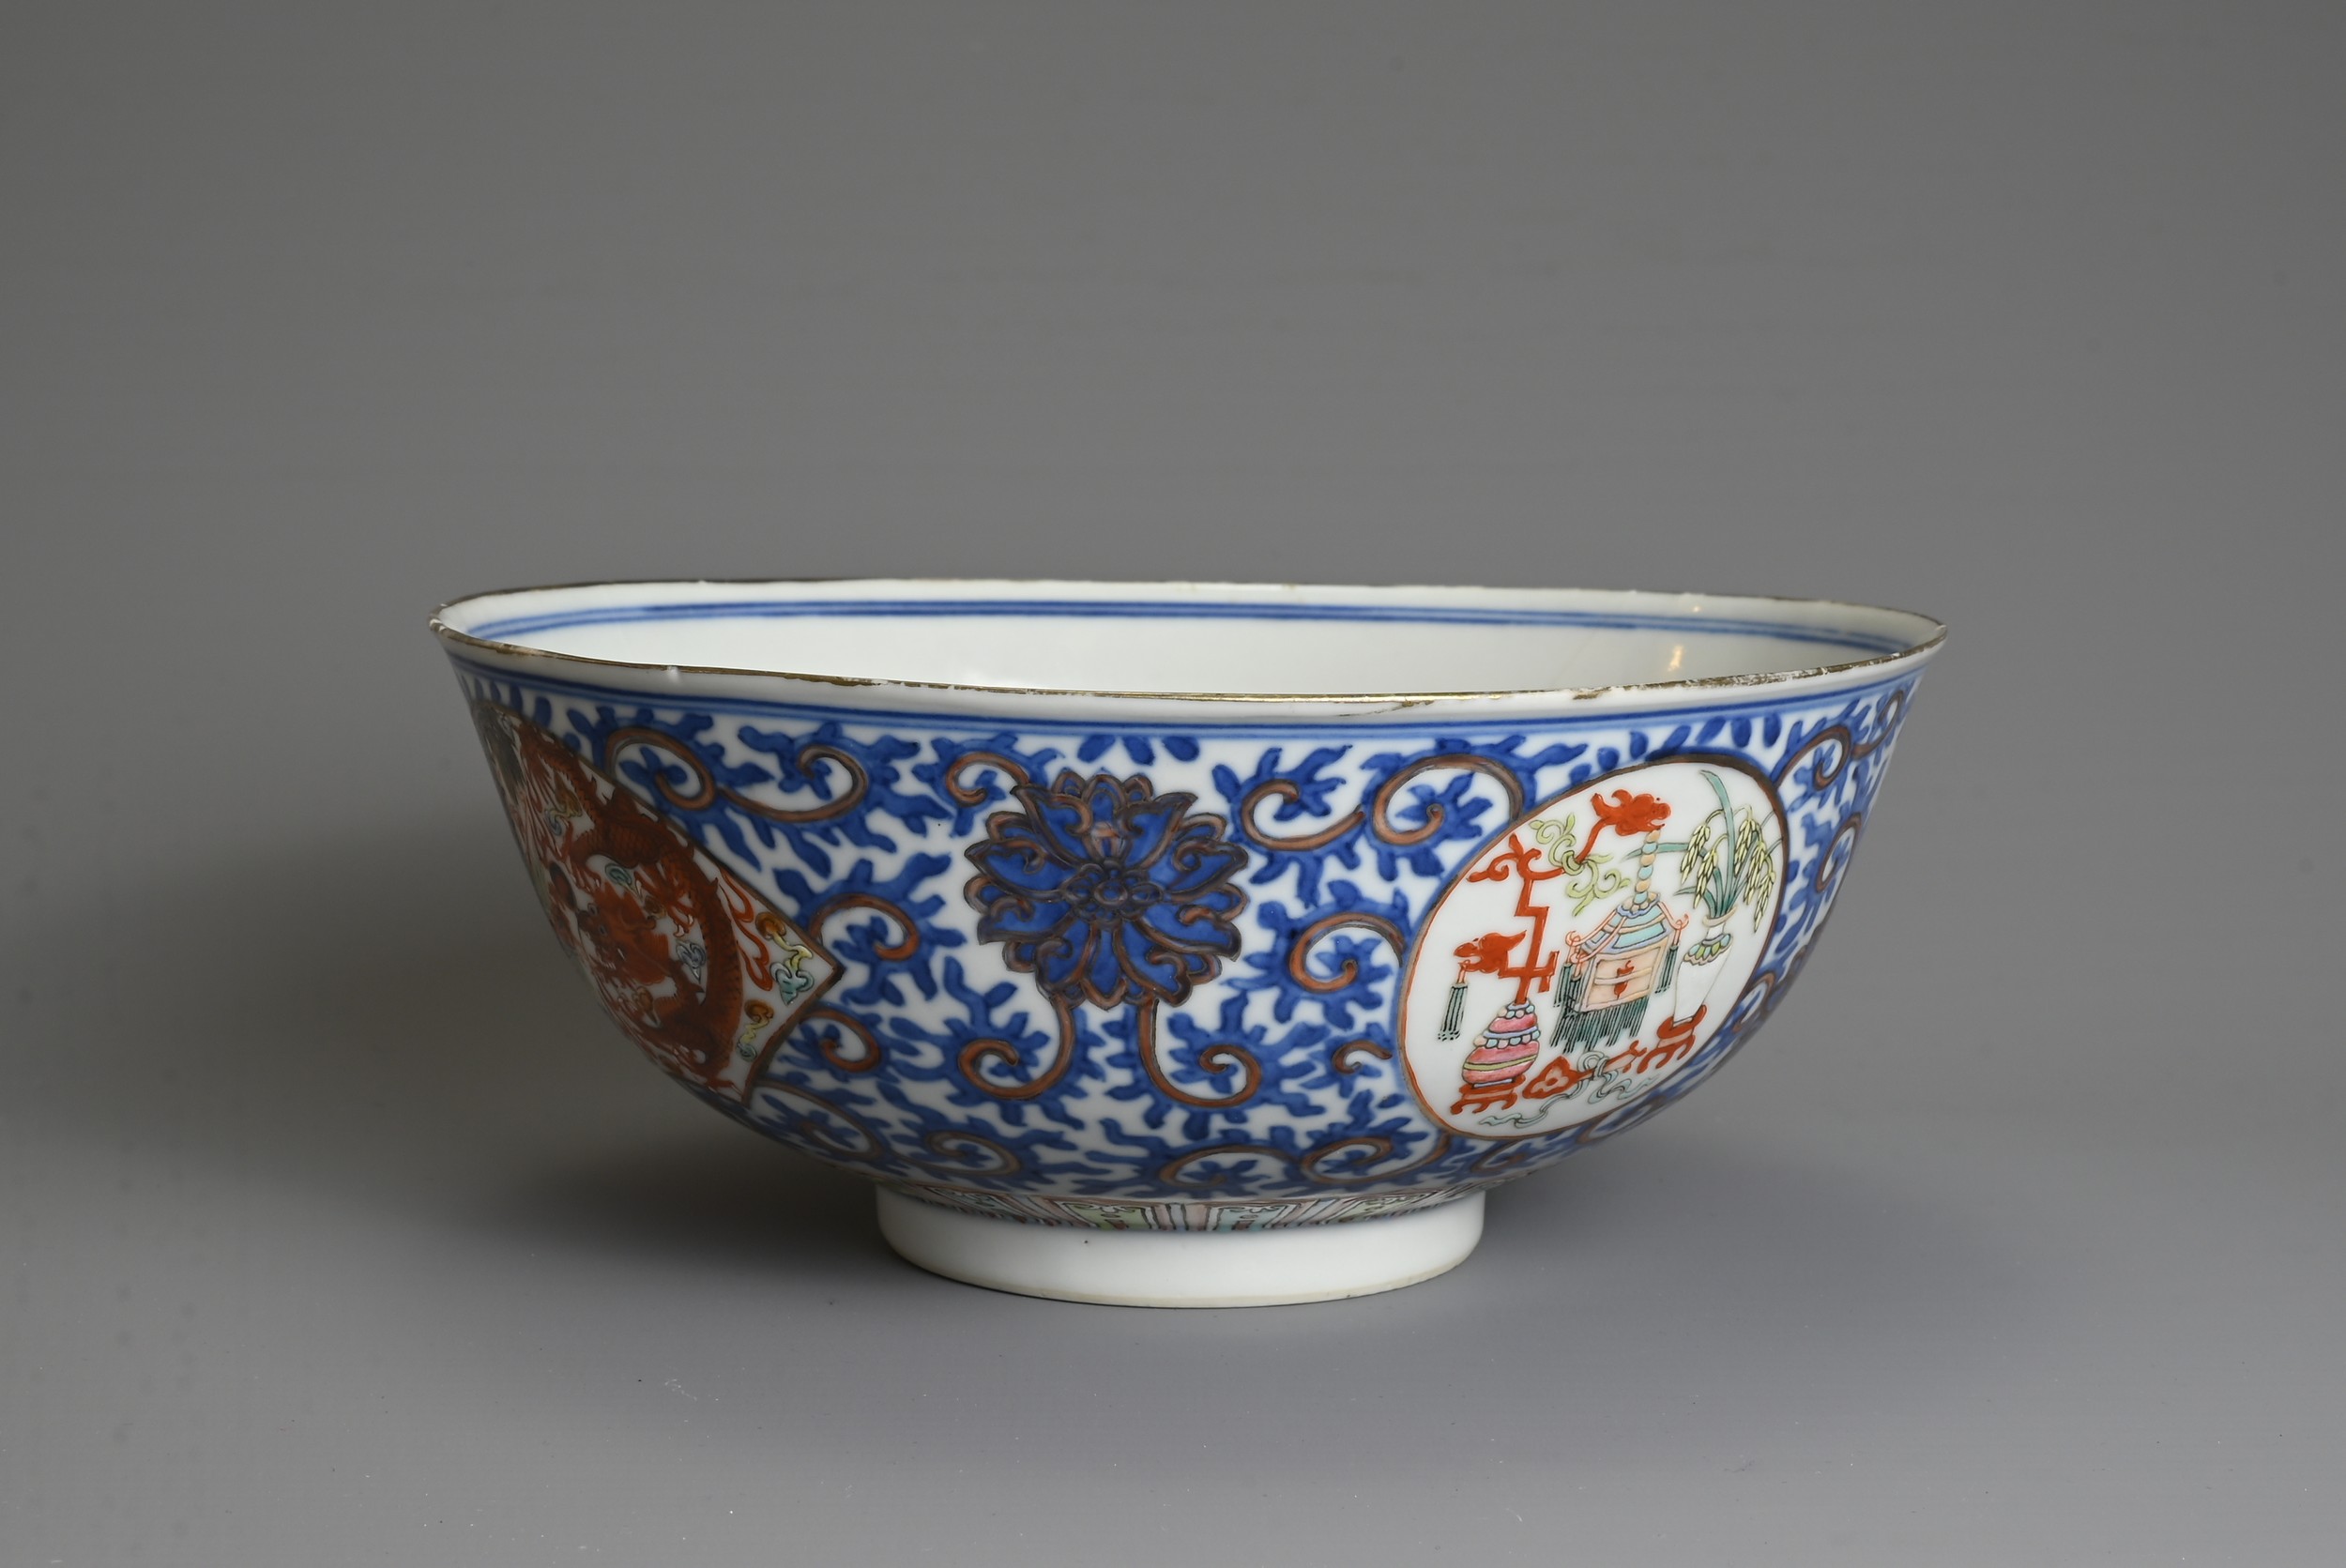 A CHINESE BLUE AND WHITE AND ENAMEL DECORATED PORCELAIN BOWL, LATE QING DYNASTY. Decorated with - Image 2 of 8